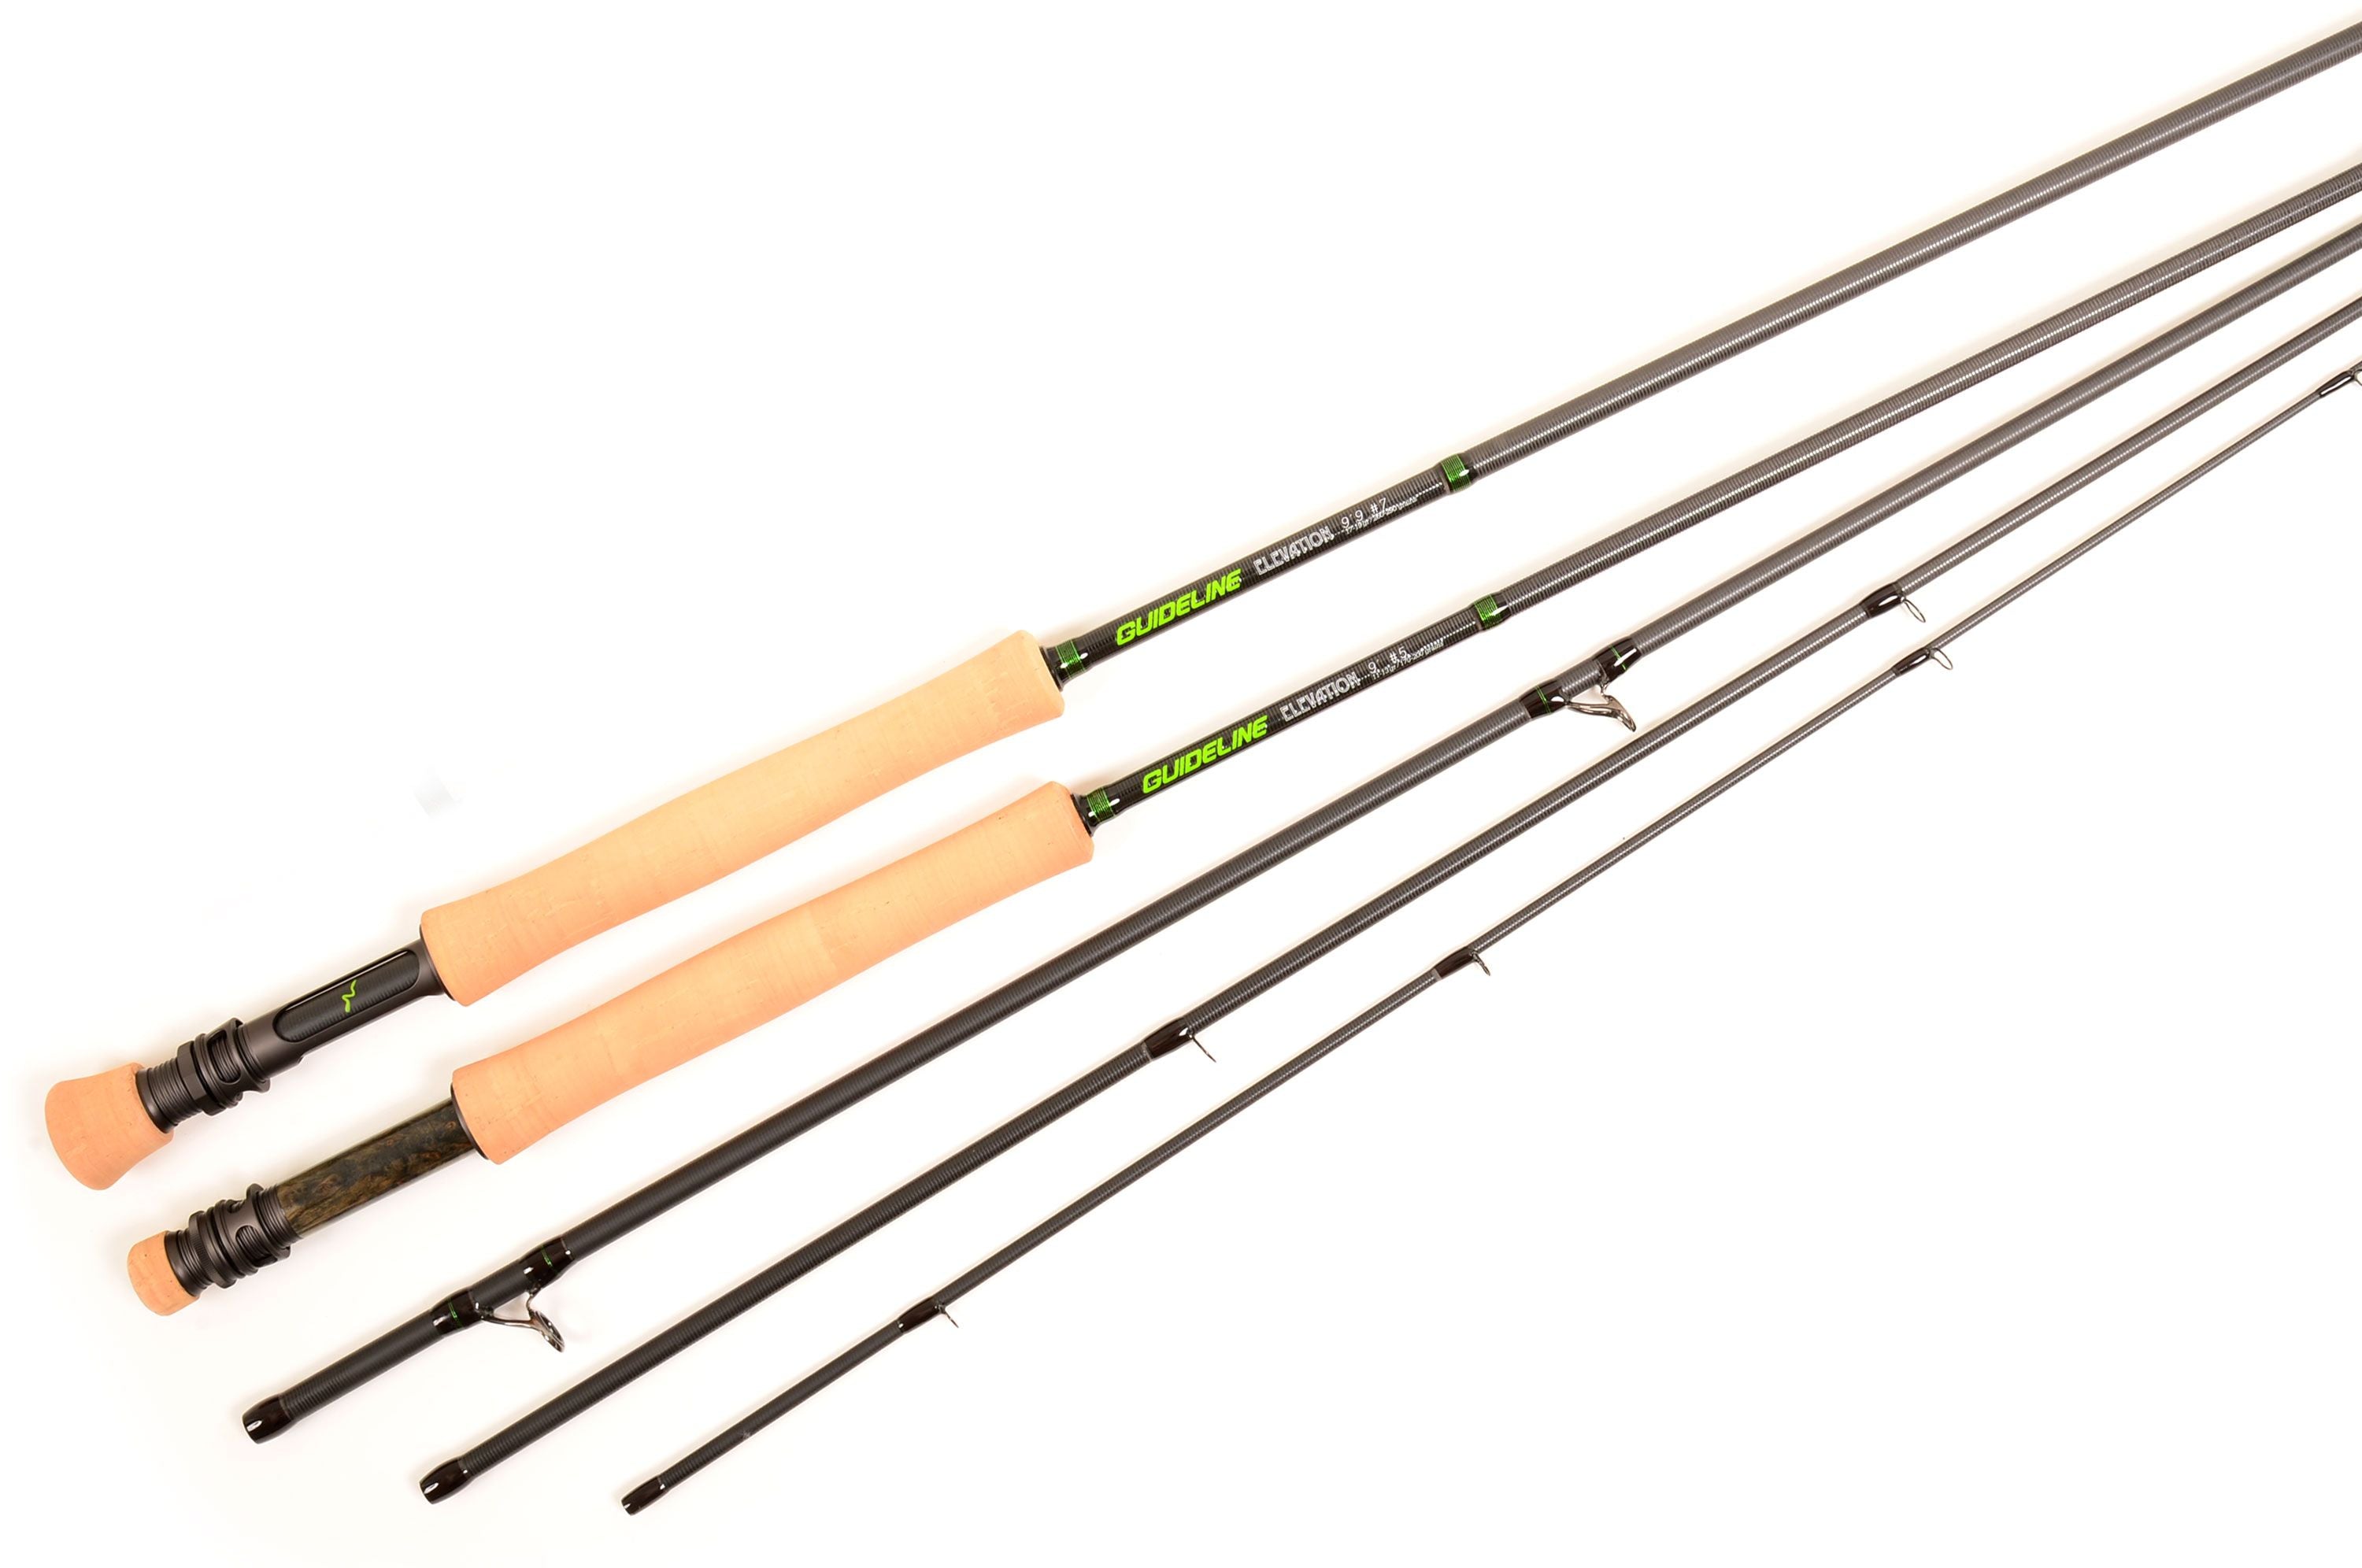 GUIDELINE ELEVATION SH 4PCE FLY RODS -  25% OFF!